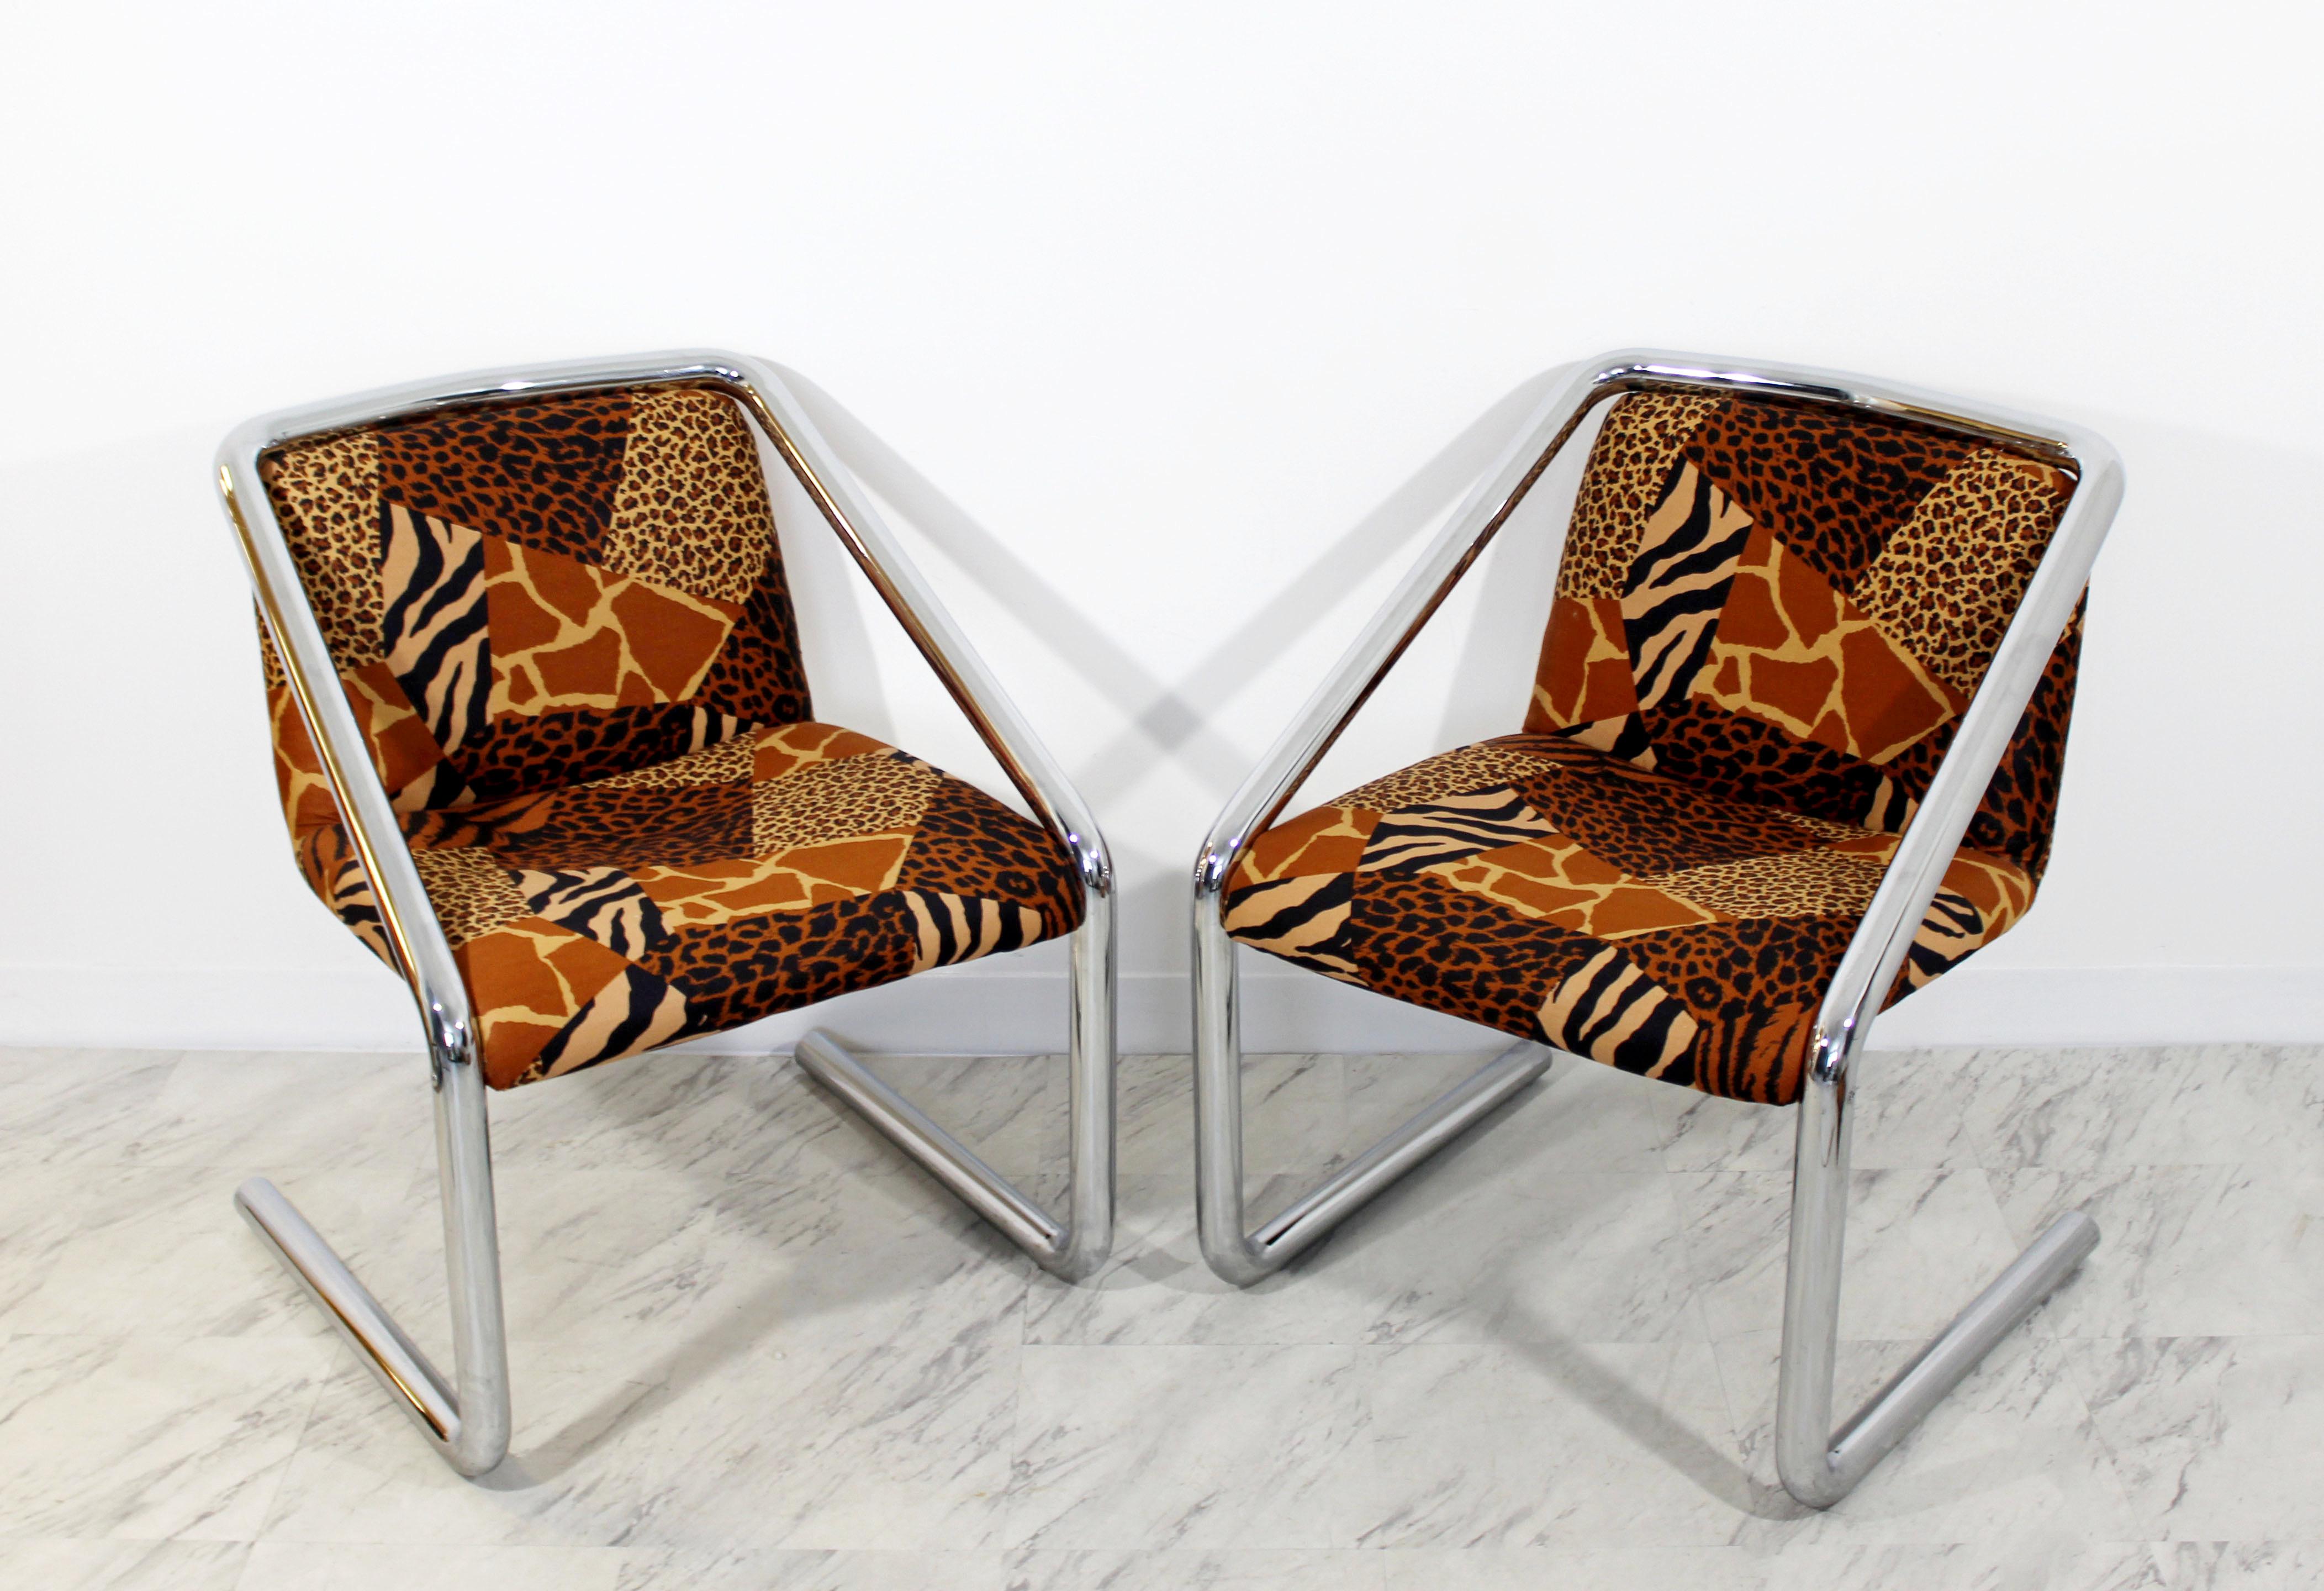 For your consideration is a fabulous pair of cantilever chairs, made of tubular chrome, with a funky cheetah print upholstery, circa the 1970s. In the style of John Mascheroni. In excellent condition. The dimensions are 23